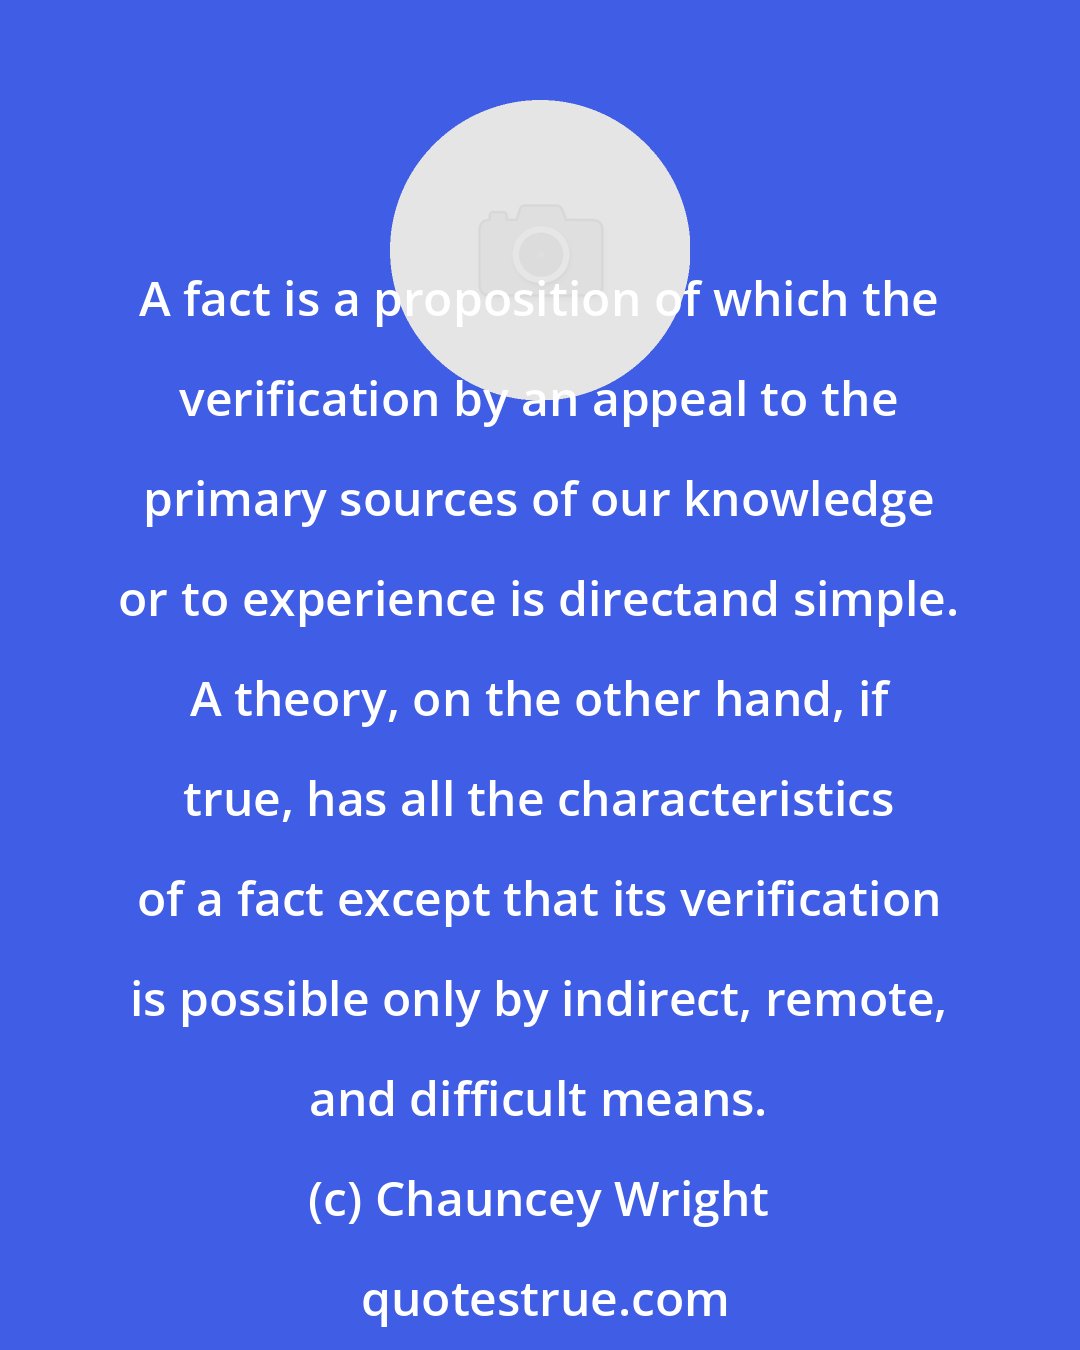 Chauncey Wright: A fact is a proposition of which the verification by an appeal to the primary sources of our knowledge or to experience is directand simple. A theory, on the other hand, if true, has all the characteristics of a fact except that its verification is possible only by indirect, remote, and difficult means.